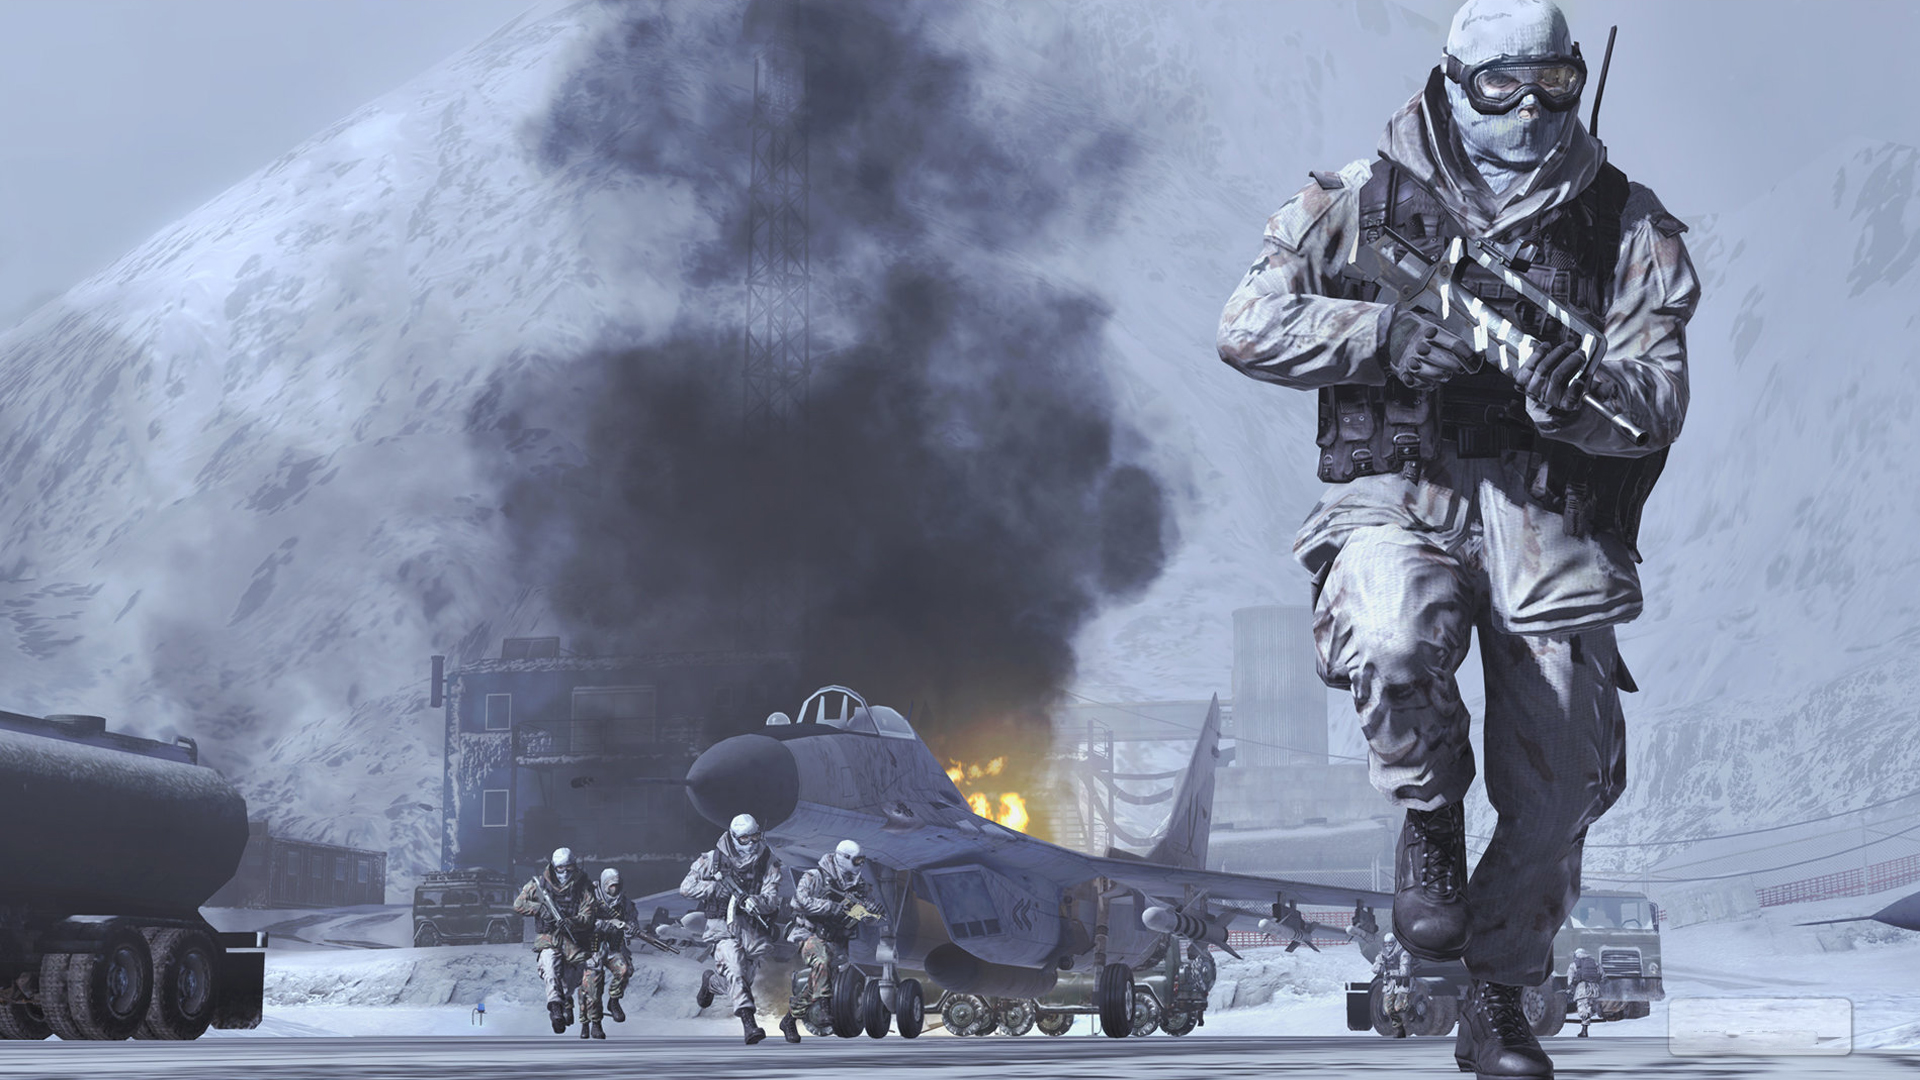 call of duty modern warfare 2 wallpaper free download fully pc games 4 1920x1080